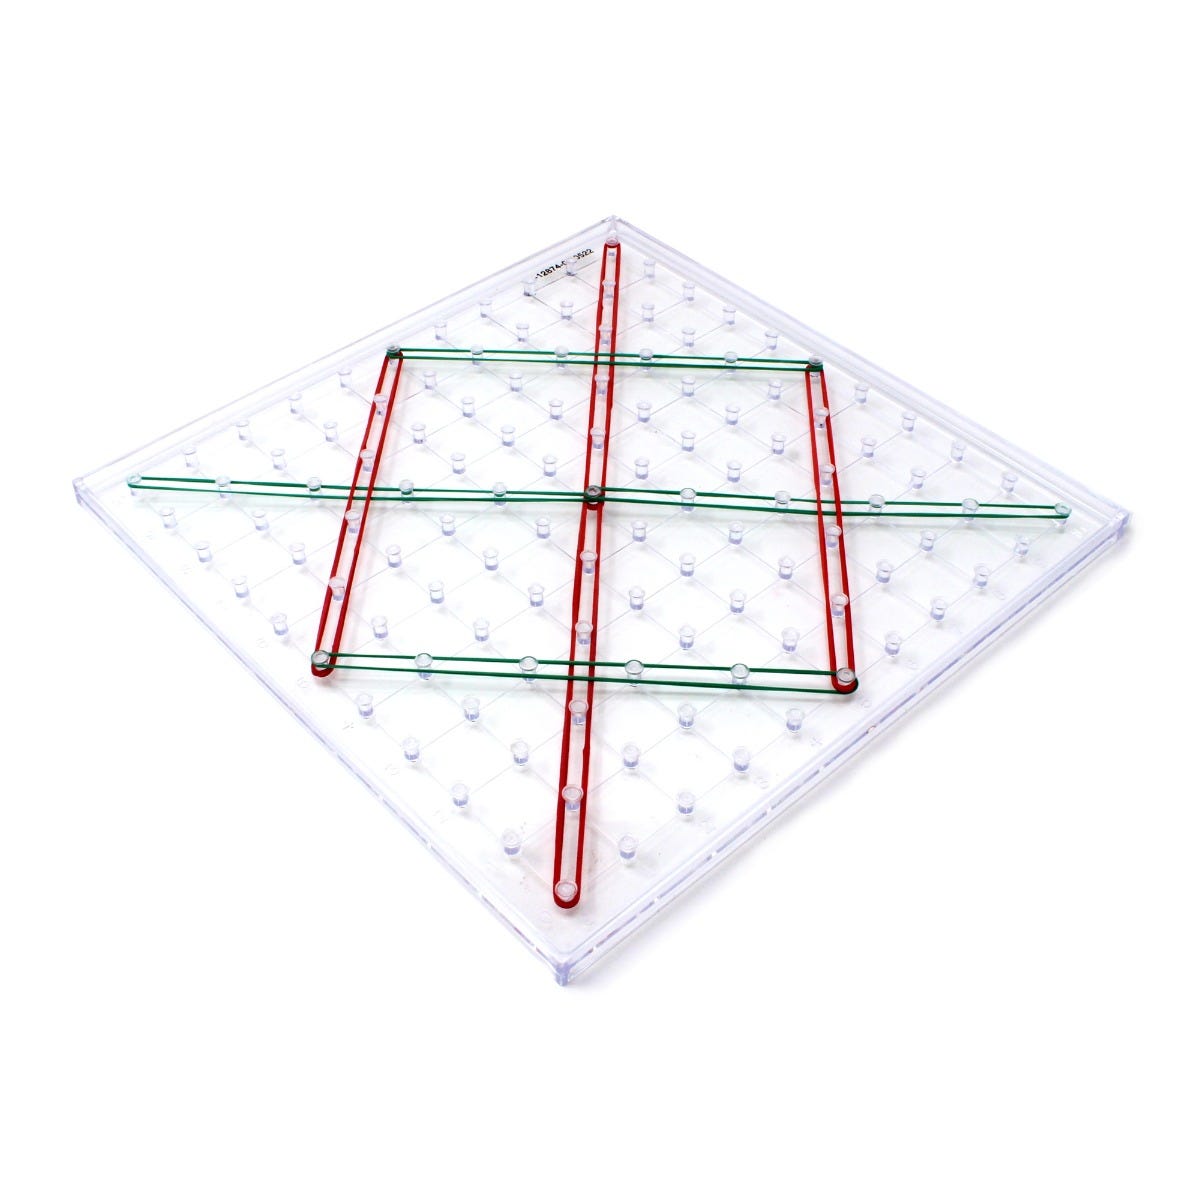 Transparent Geoboard, Geoboards are a visual way for children to grasp the basics of maths principles including geometry, symmetry, angles, fractions, and more through fun, hands-on learning activities. Made from durable transparent plastic, the 11 x 11 pin Transparent Geoboard is ideal for maths learning in the classroom and at home. Use the included colourful elastic bands, and add your own for even more creative maths fun. Grab an elastic band and start learning about angles, shapes, geometry and more! T